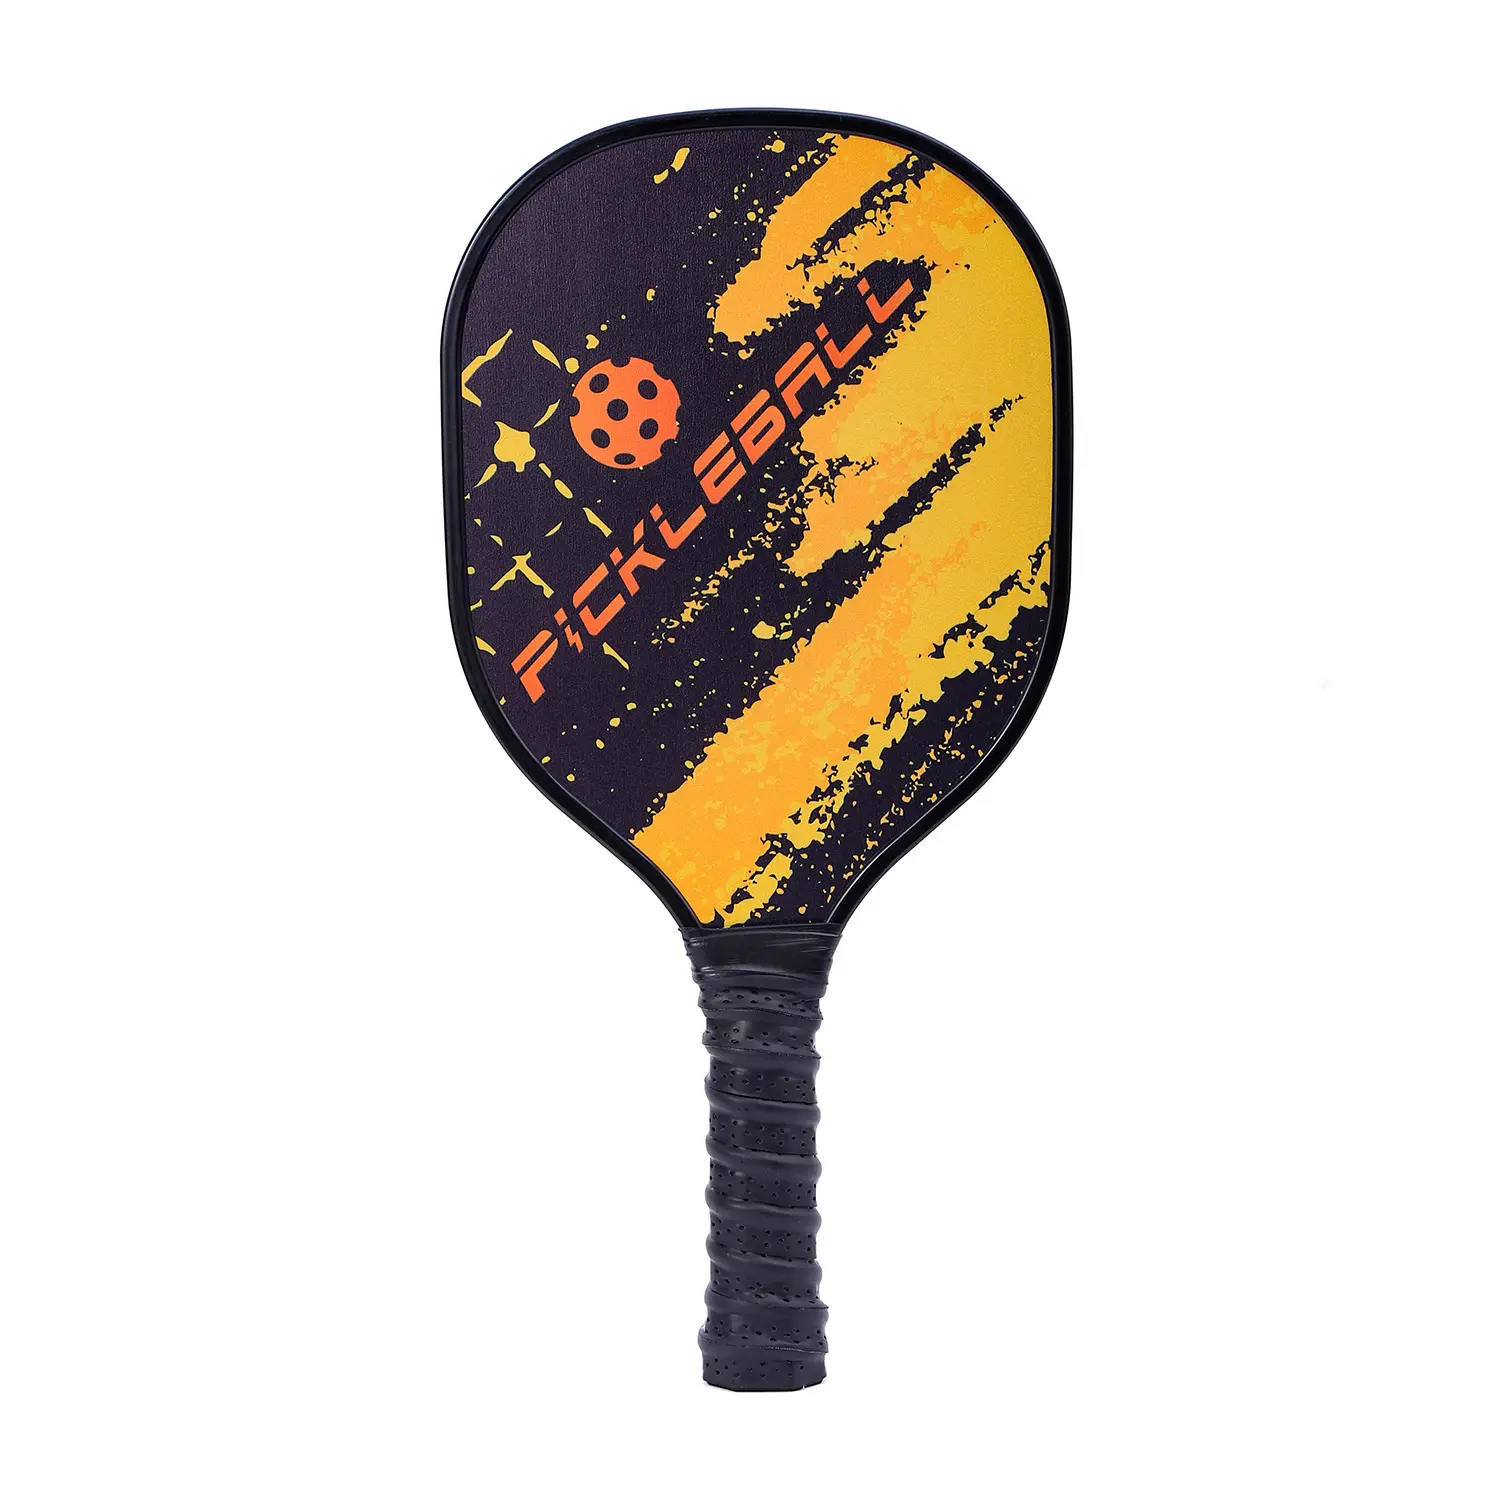 High Quality High-end usa approved carbon fiber cover racket sleeve usapa pickleball paddle manufacturer with grips